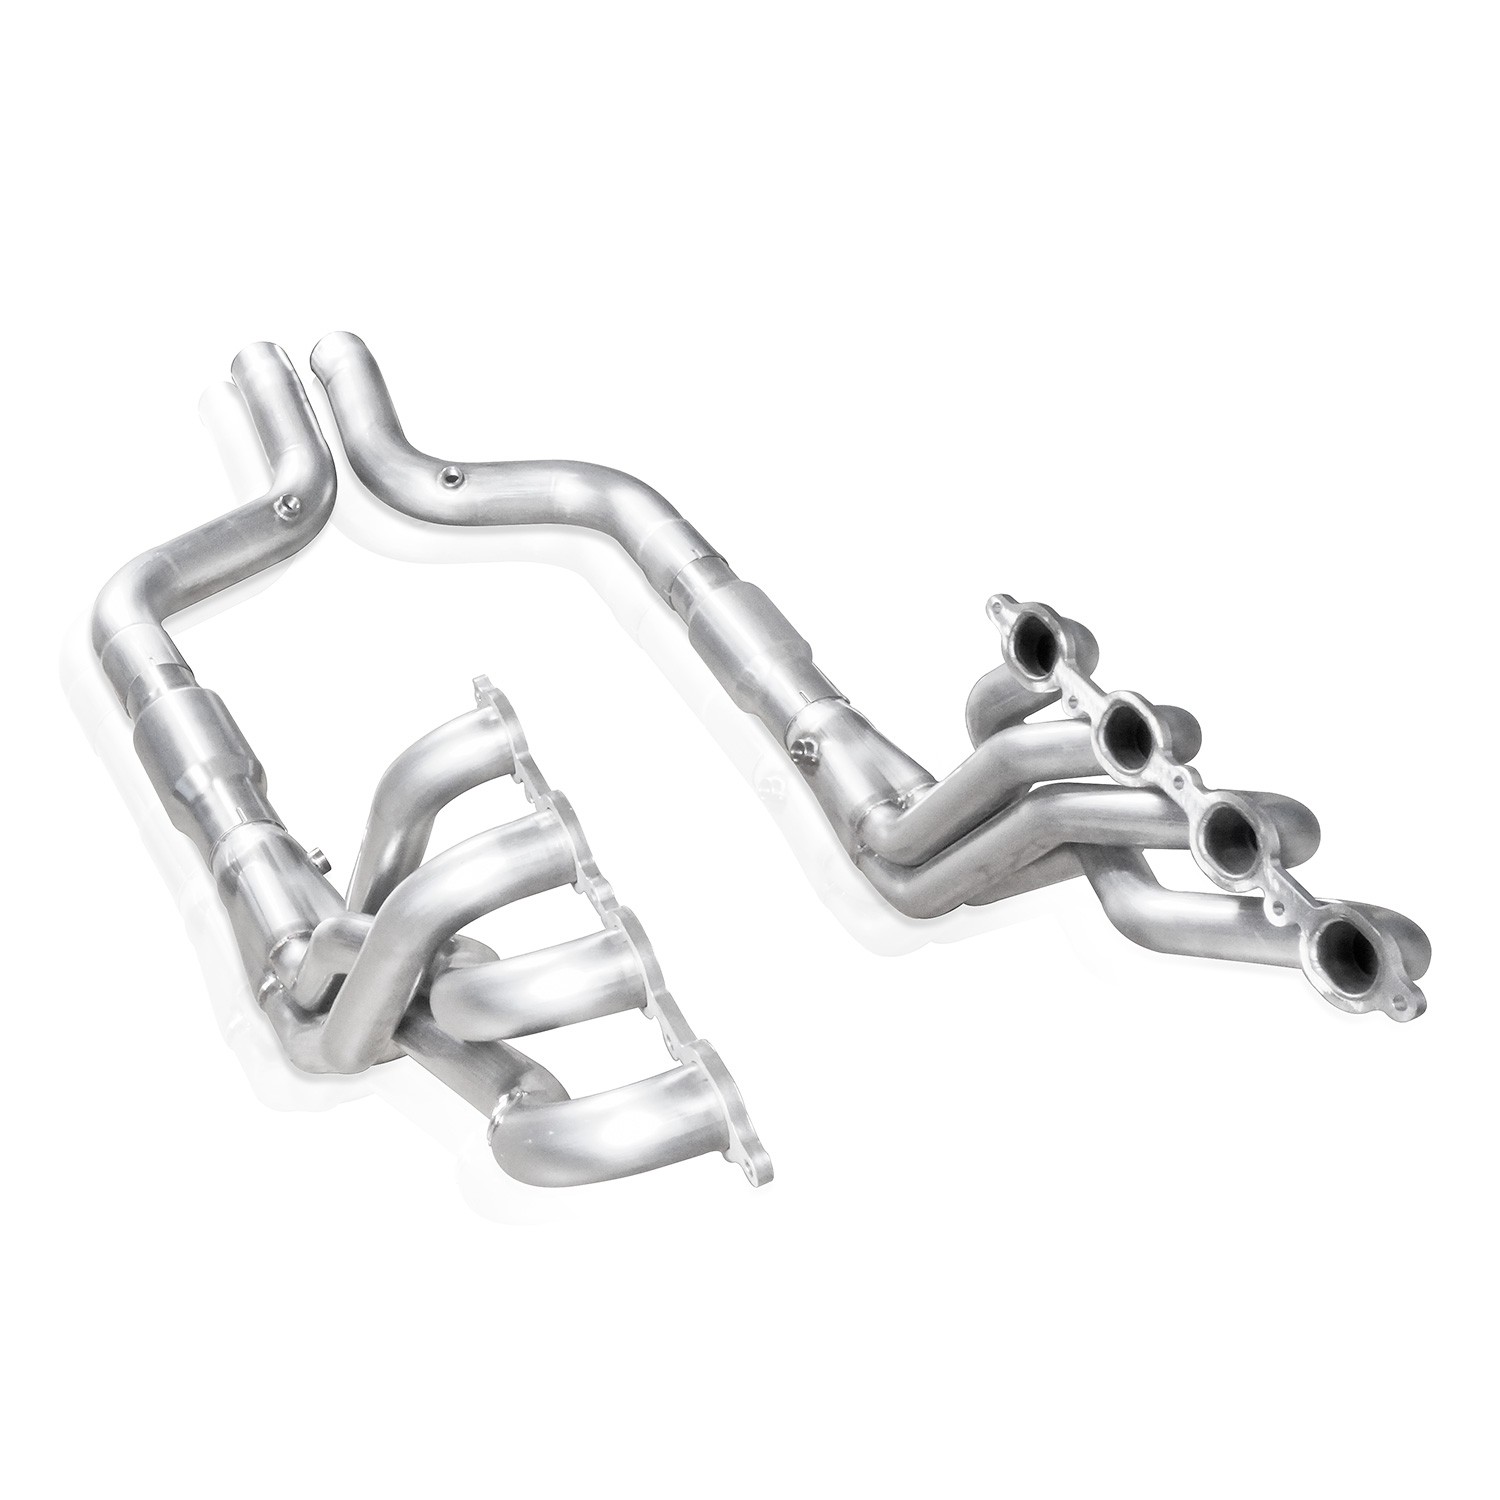 2016+ Camaro SS Stainless Works 2" Long Tube Headers with Catted Pipes - Performance Connect